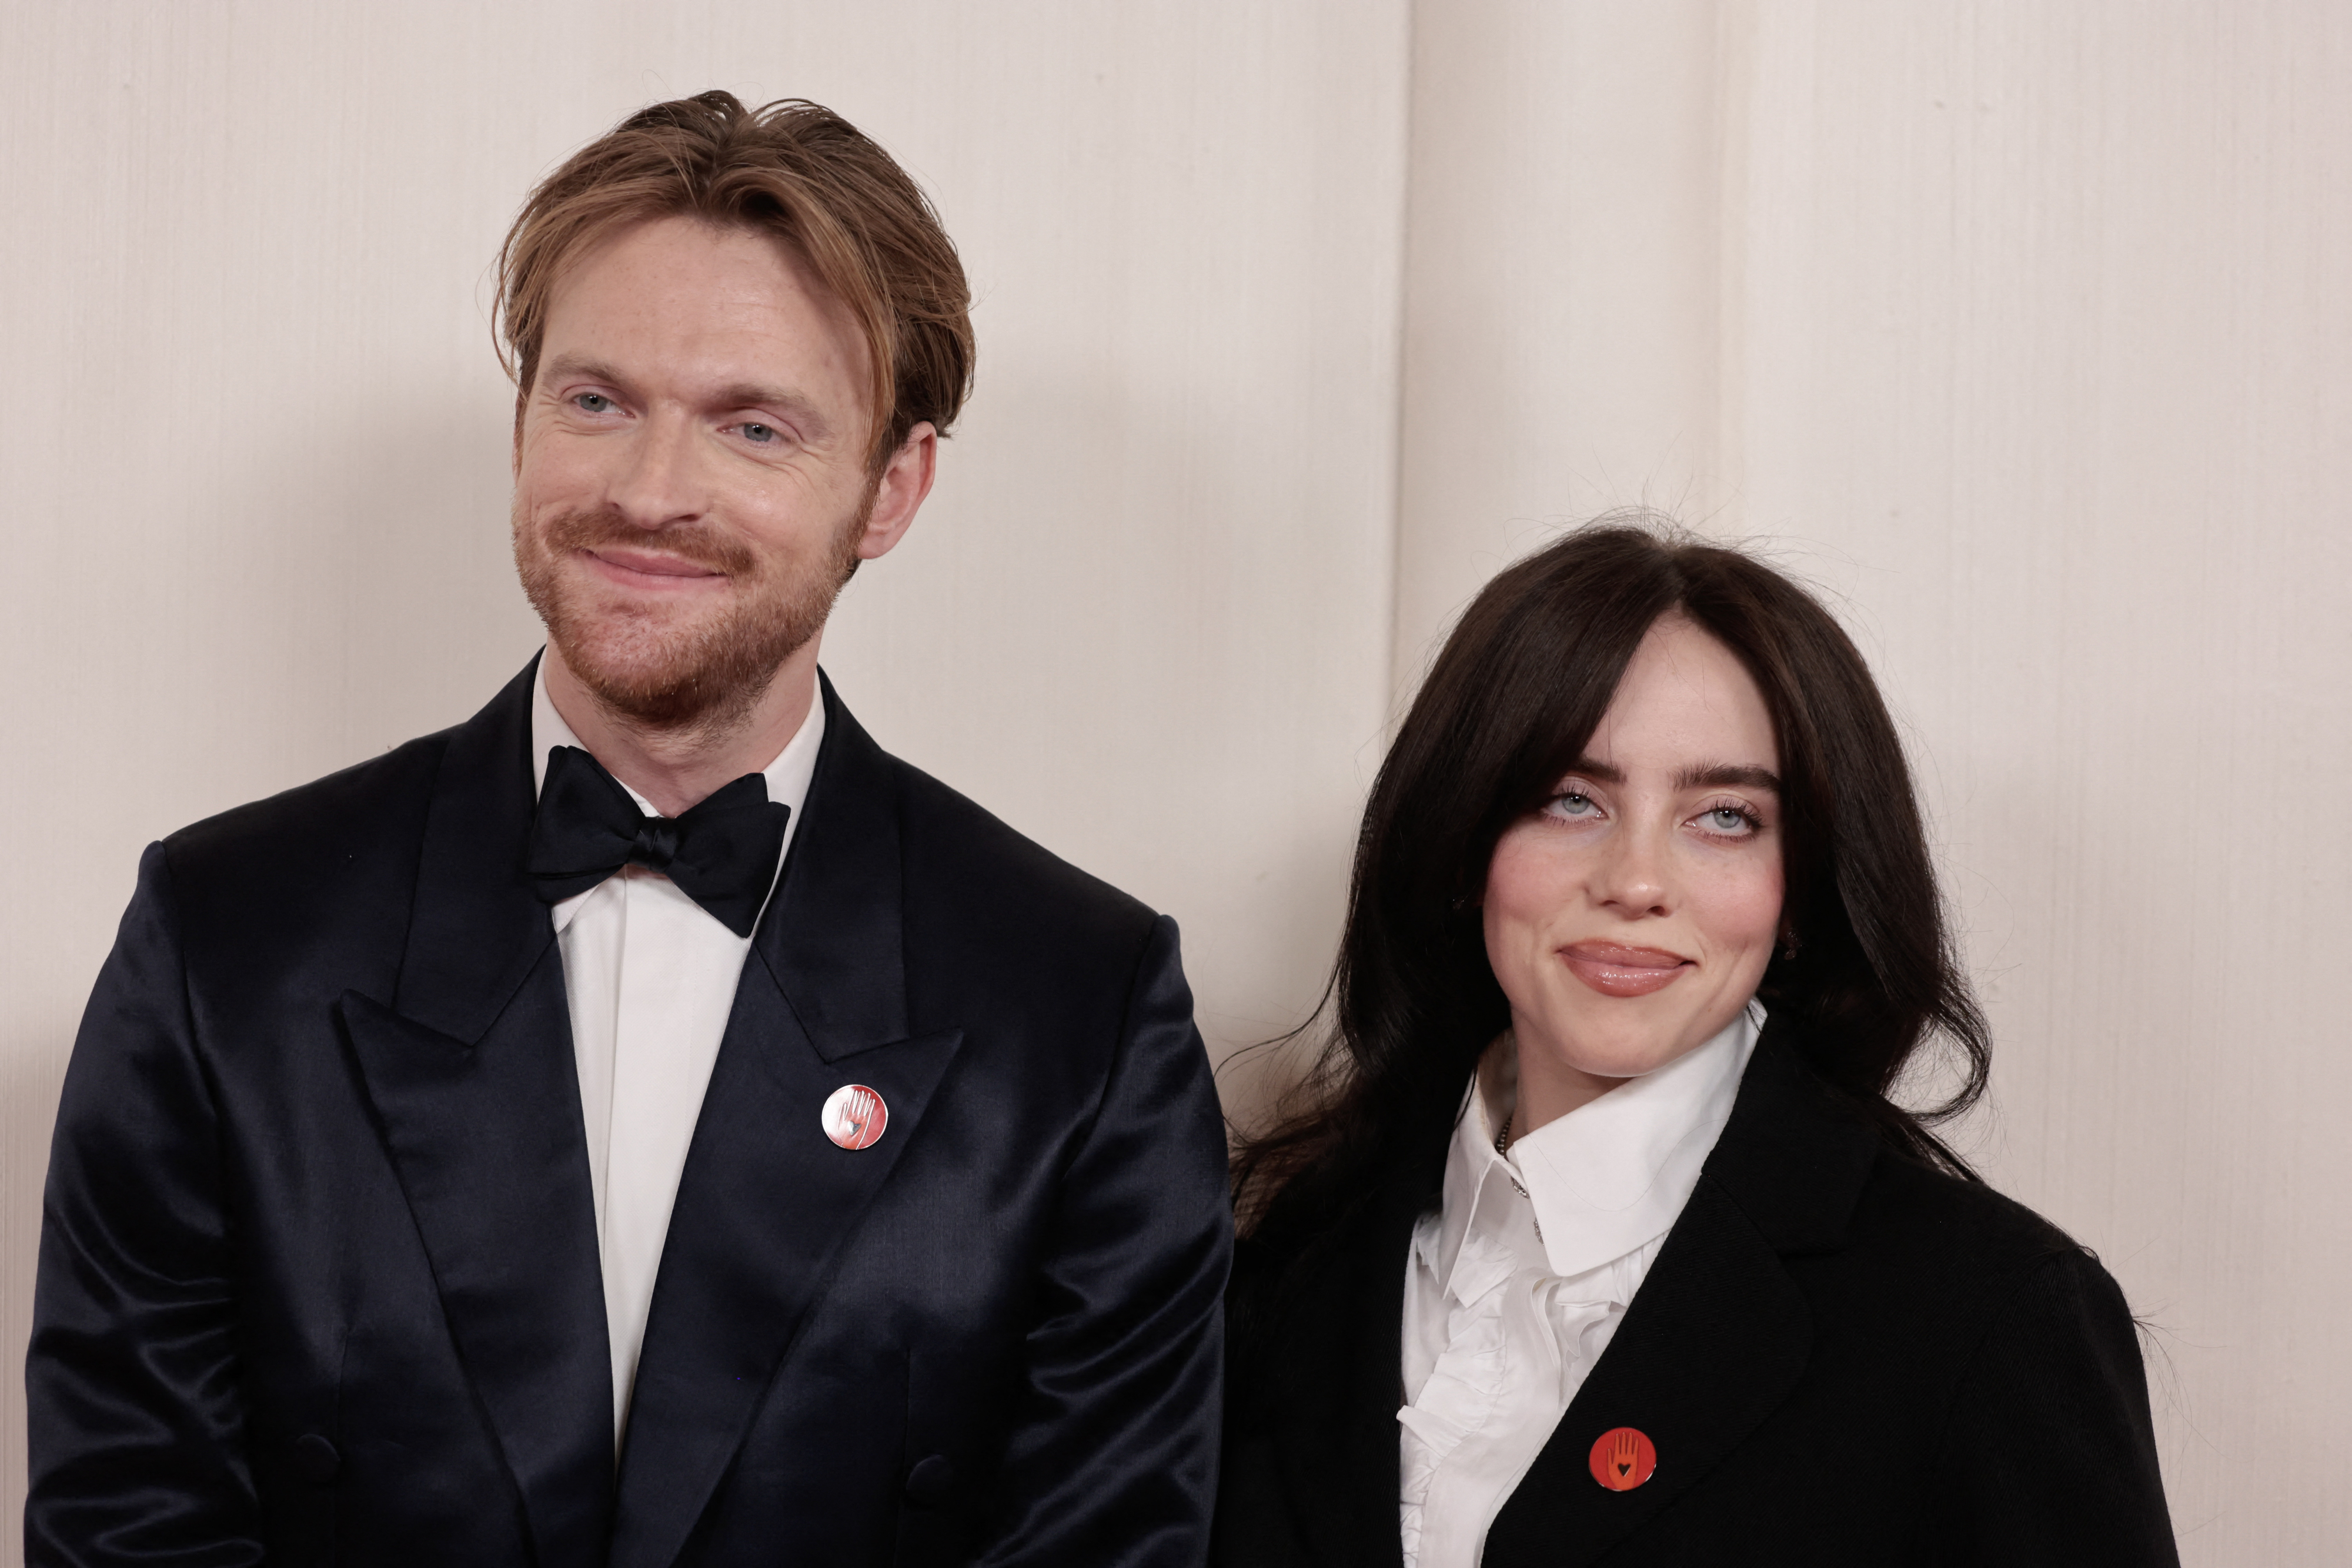 Finneas and Billie Eilish on the red carpet; one in a black tuxedo with a bow tie and the other in a suit with a white blouse. Both are wearing pins